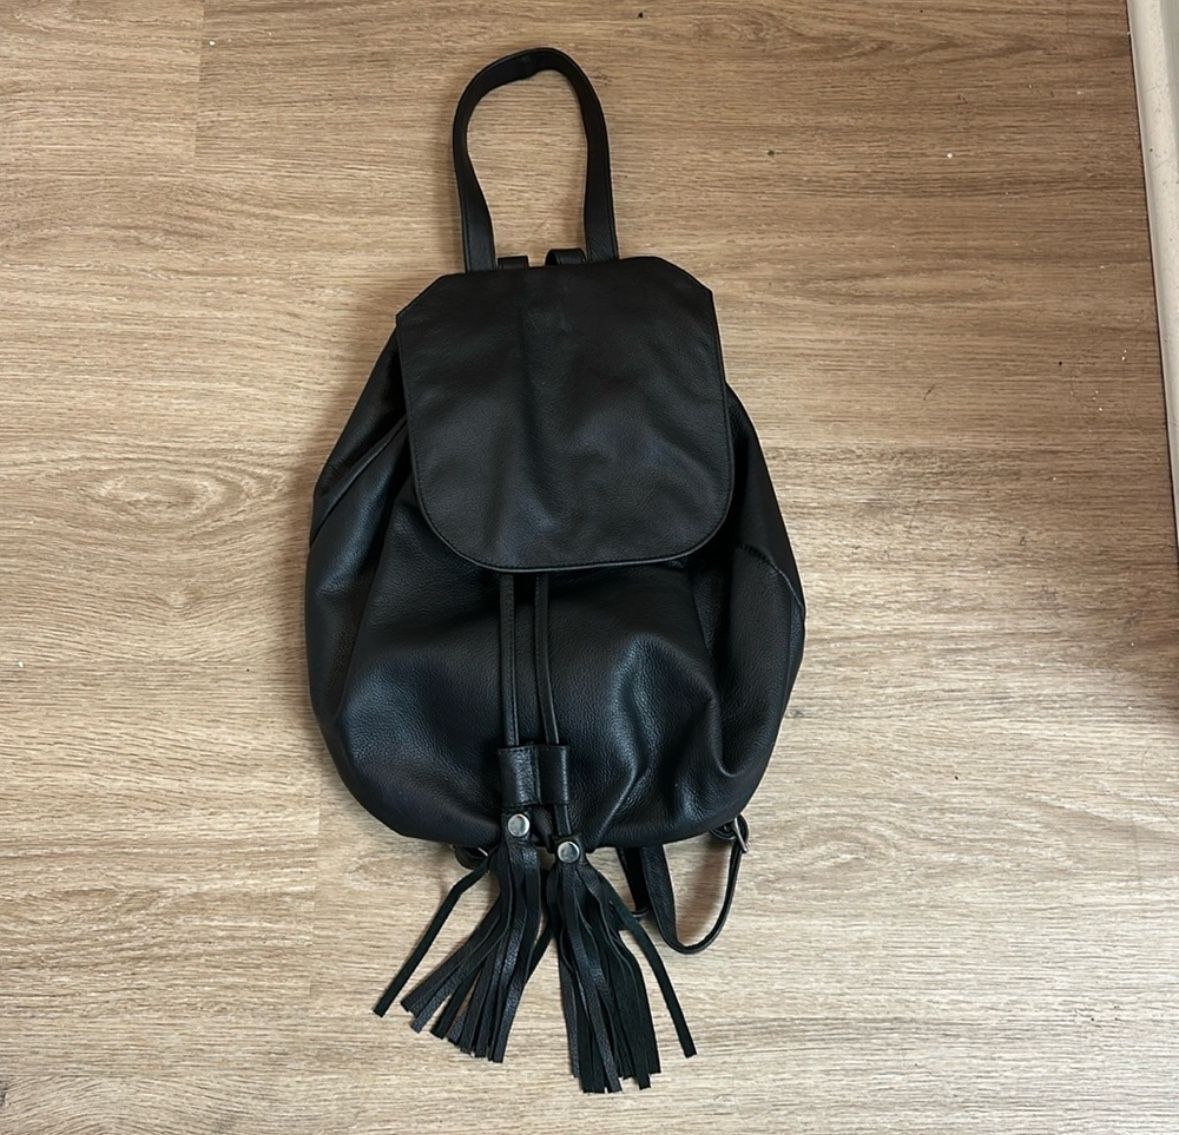 Black leather backpack with tassels